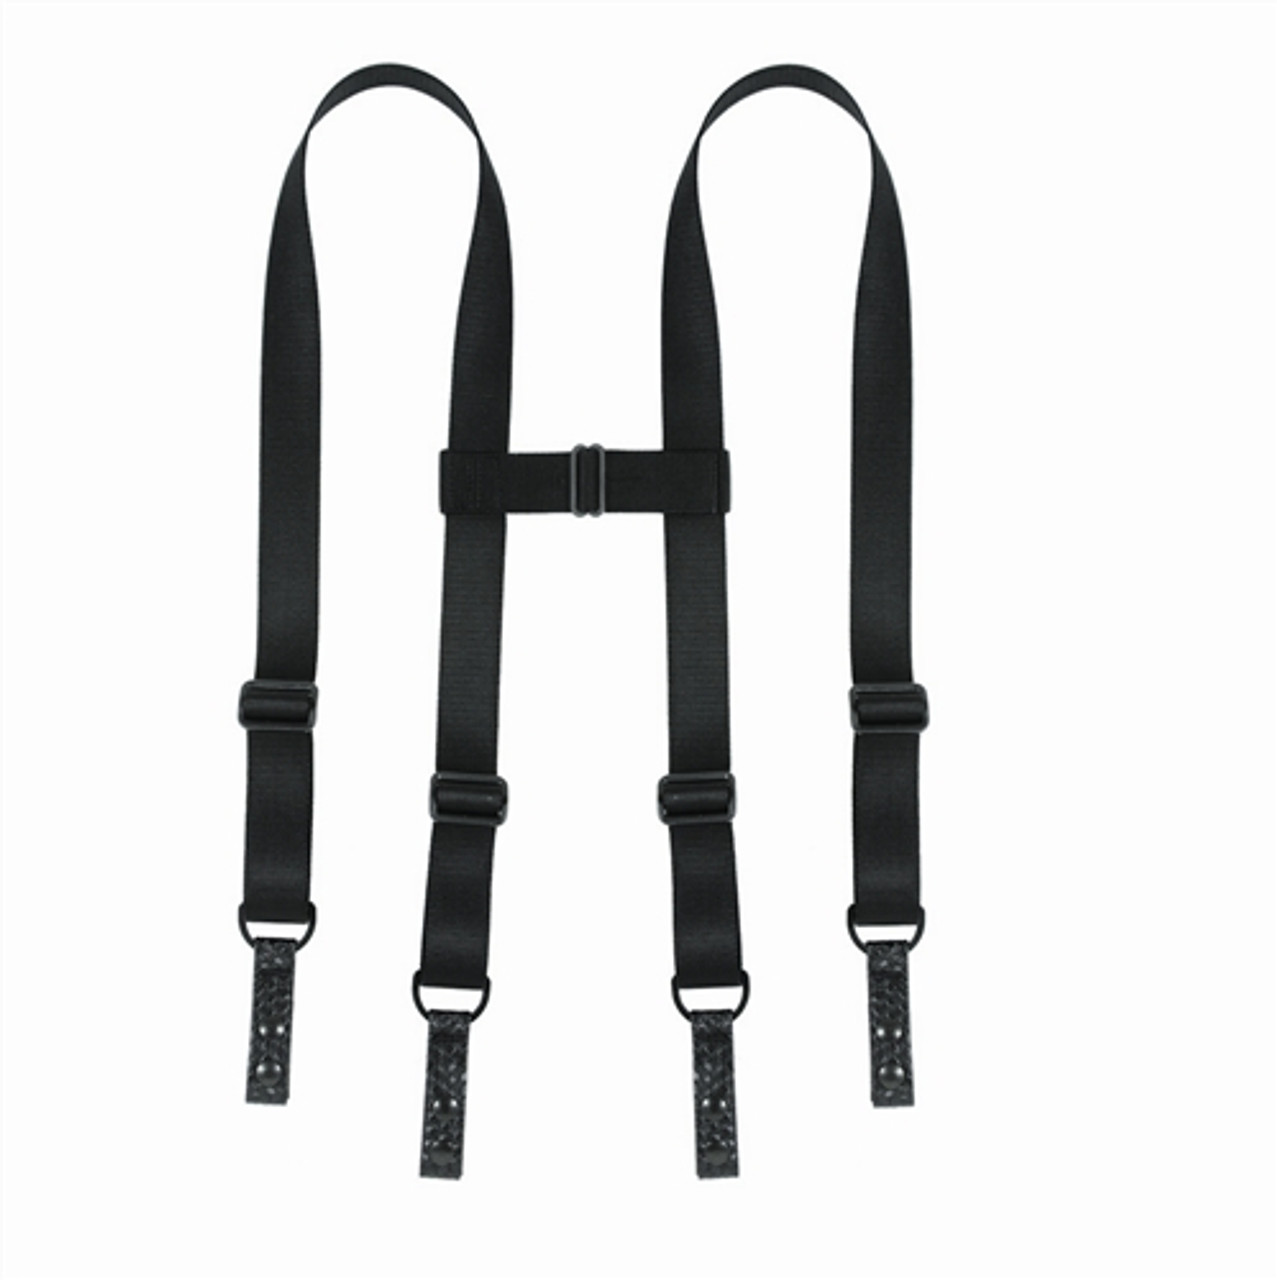 High-Performance Tactical Suspenders